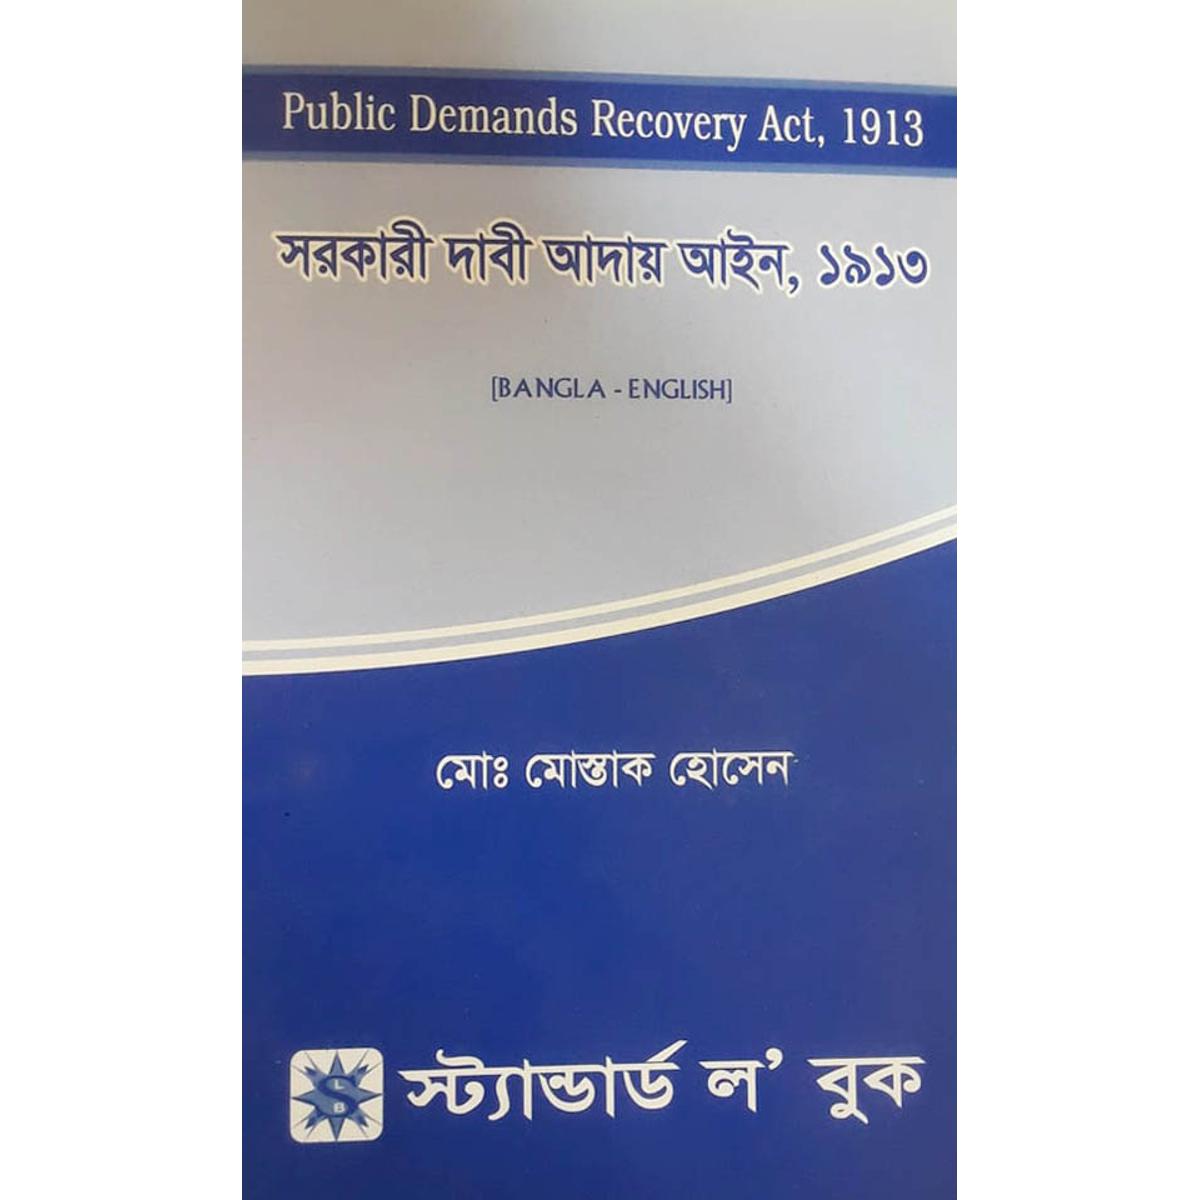 Public Demands Recovery Act, 1913